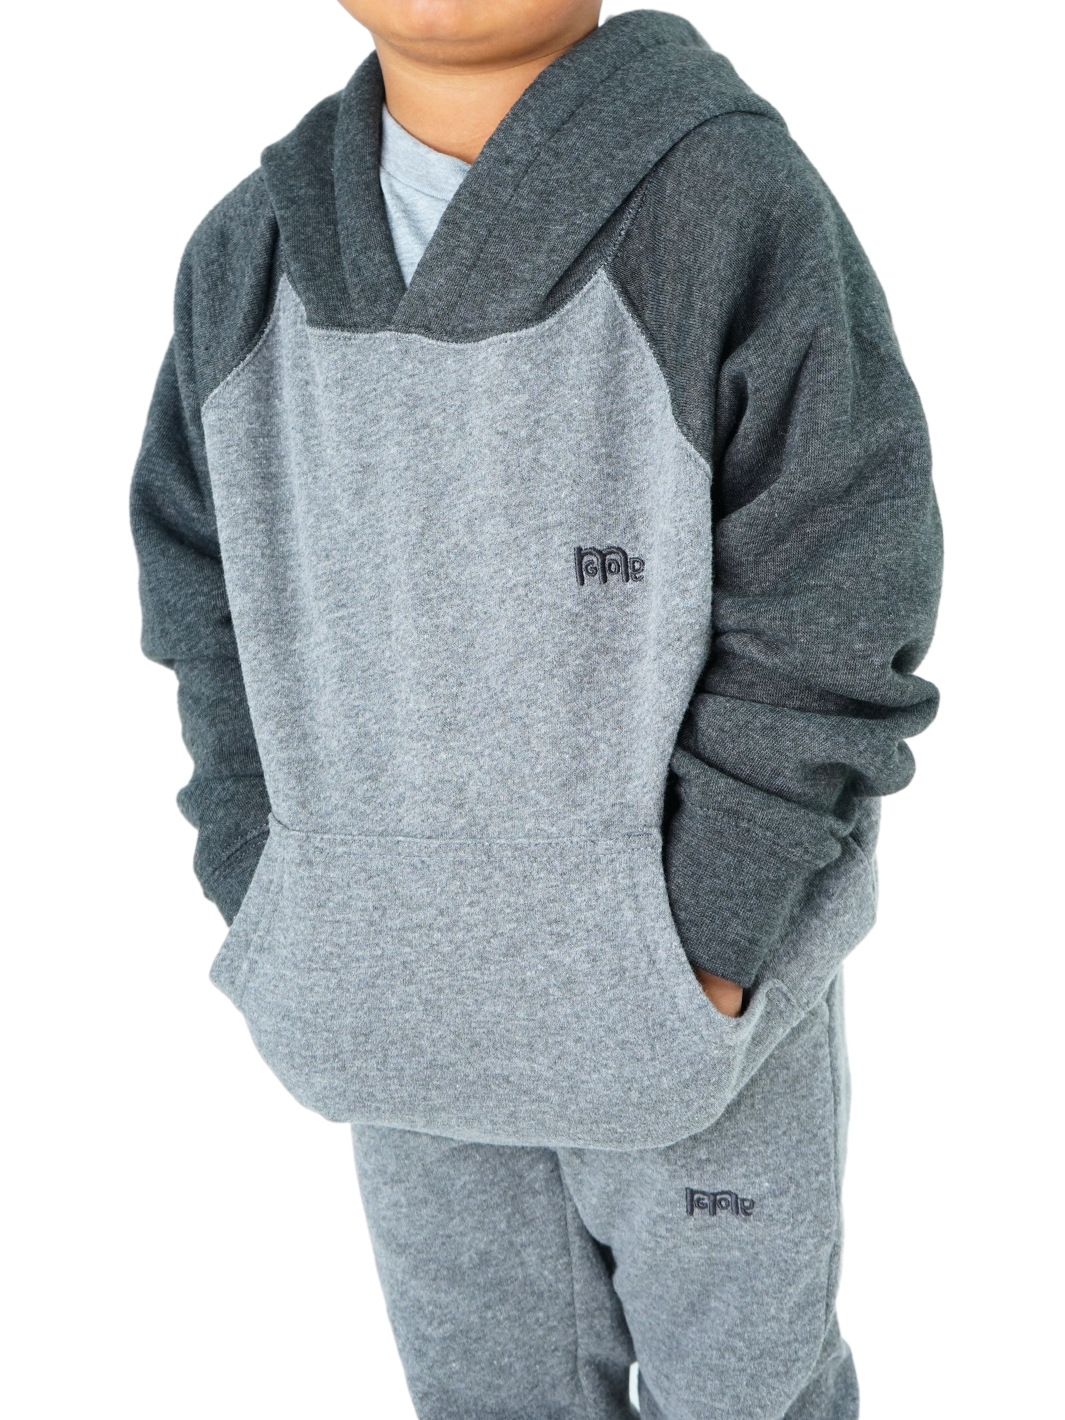 Toddler Light Grey Pullover Hoodie with Dark Grey Hood and Raglan sleeves and Dark Grey GODinme logo at left chest